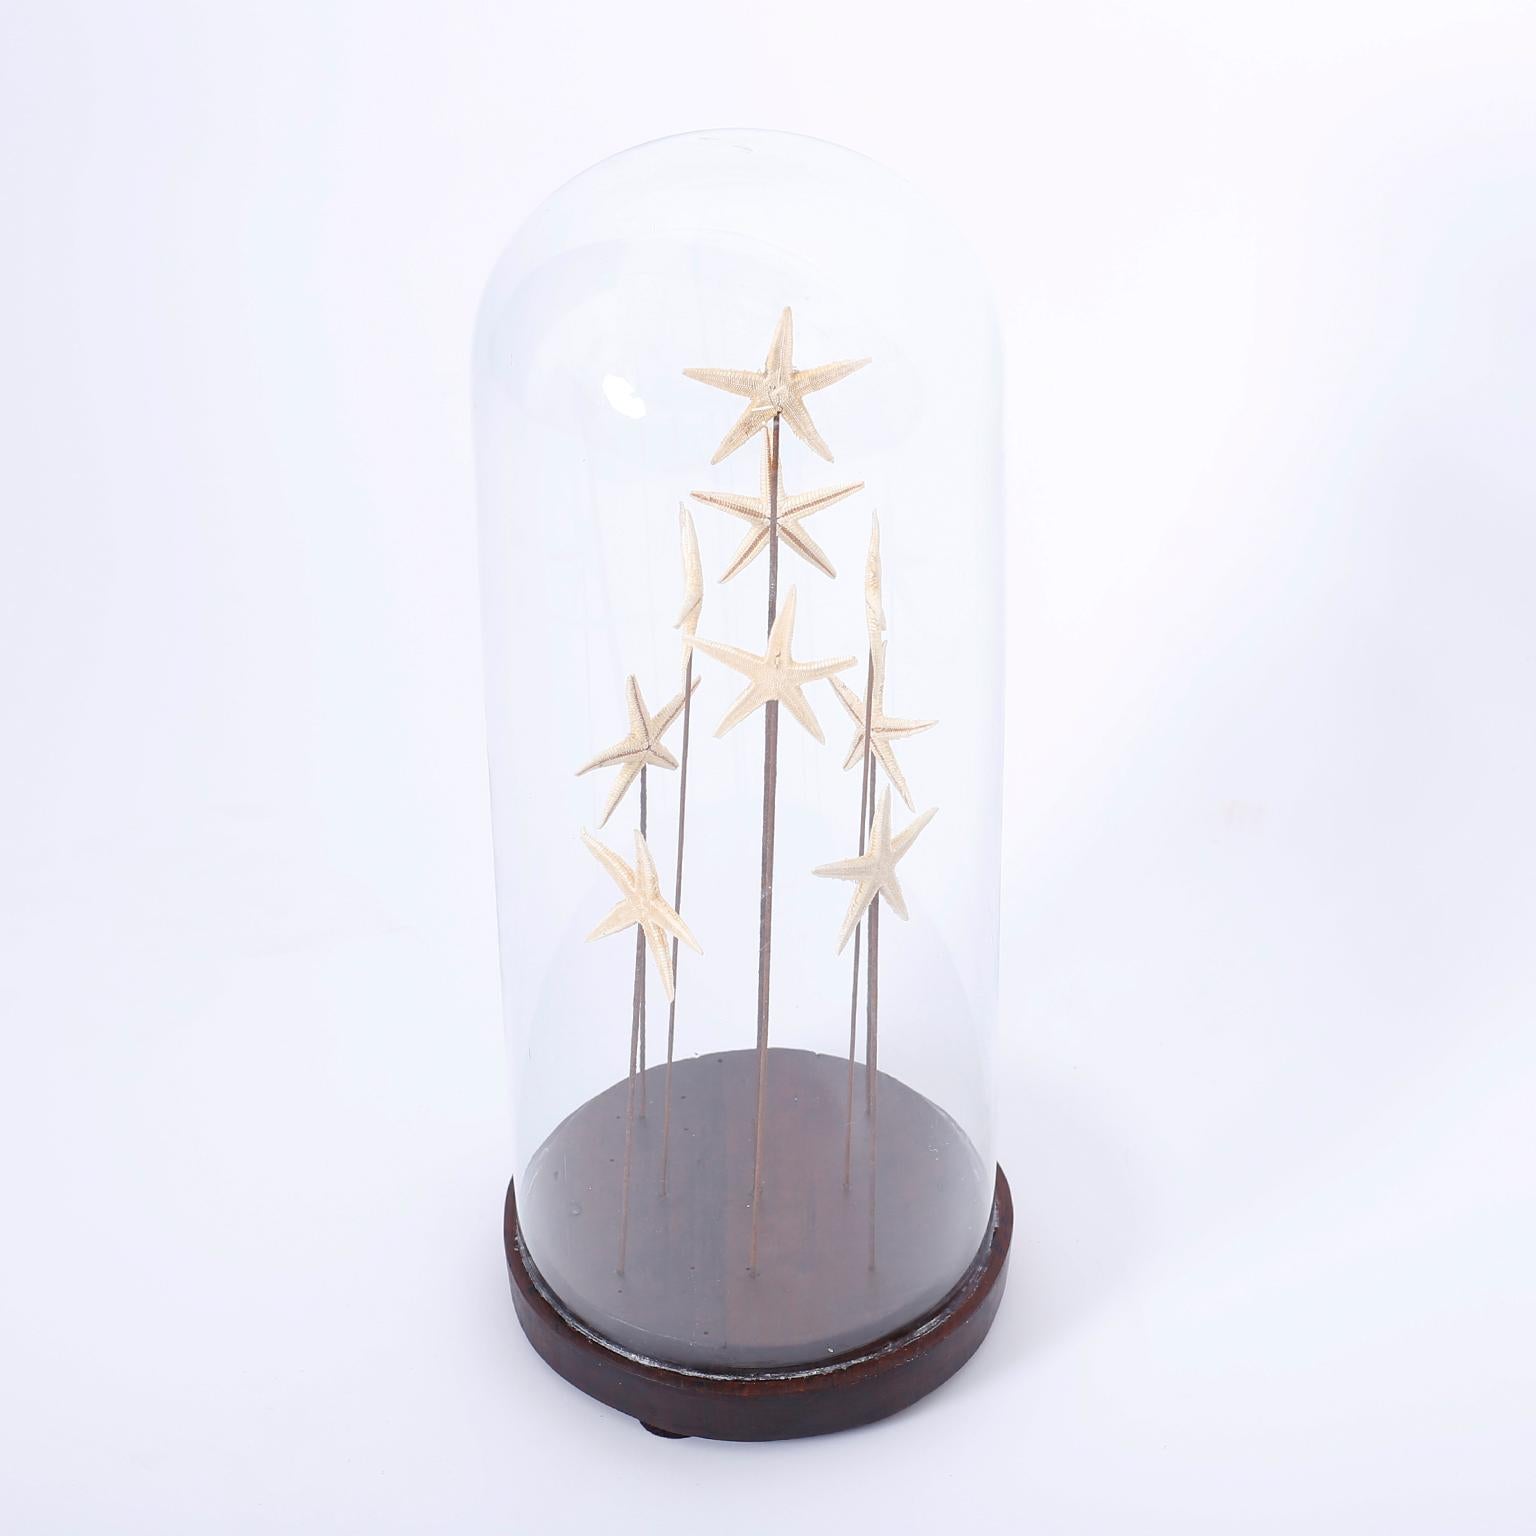 Nine starfish suspended on brass rods in a vintage glass specimen dome with a mahogany base, for your scholastic viewing pleasure.